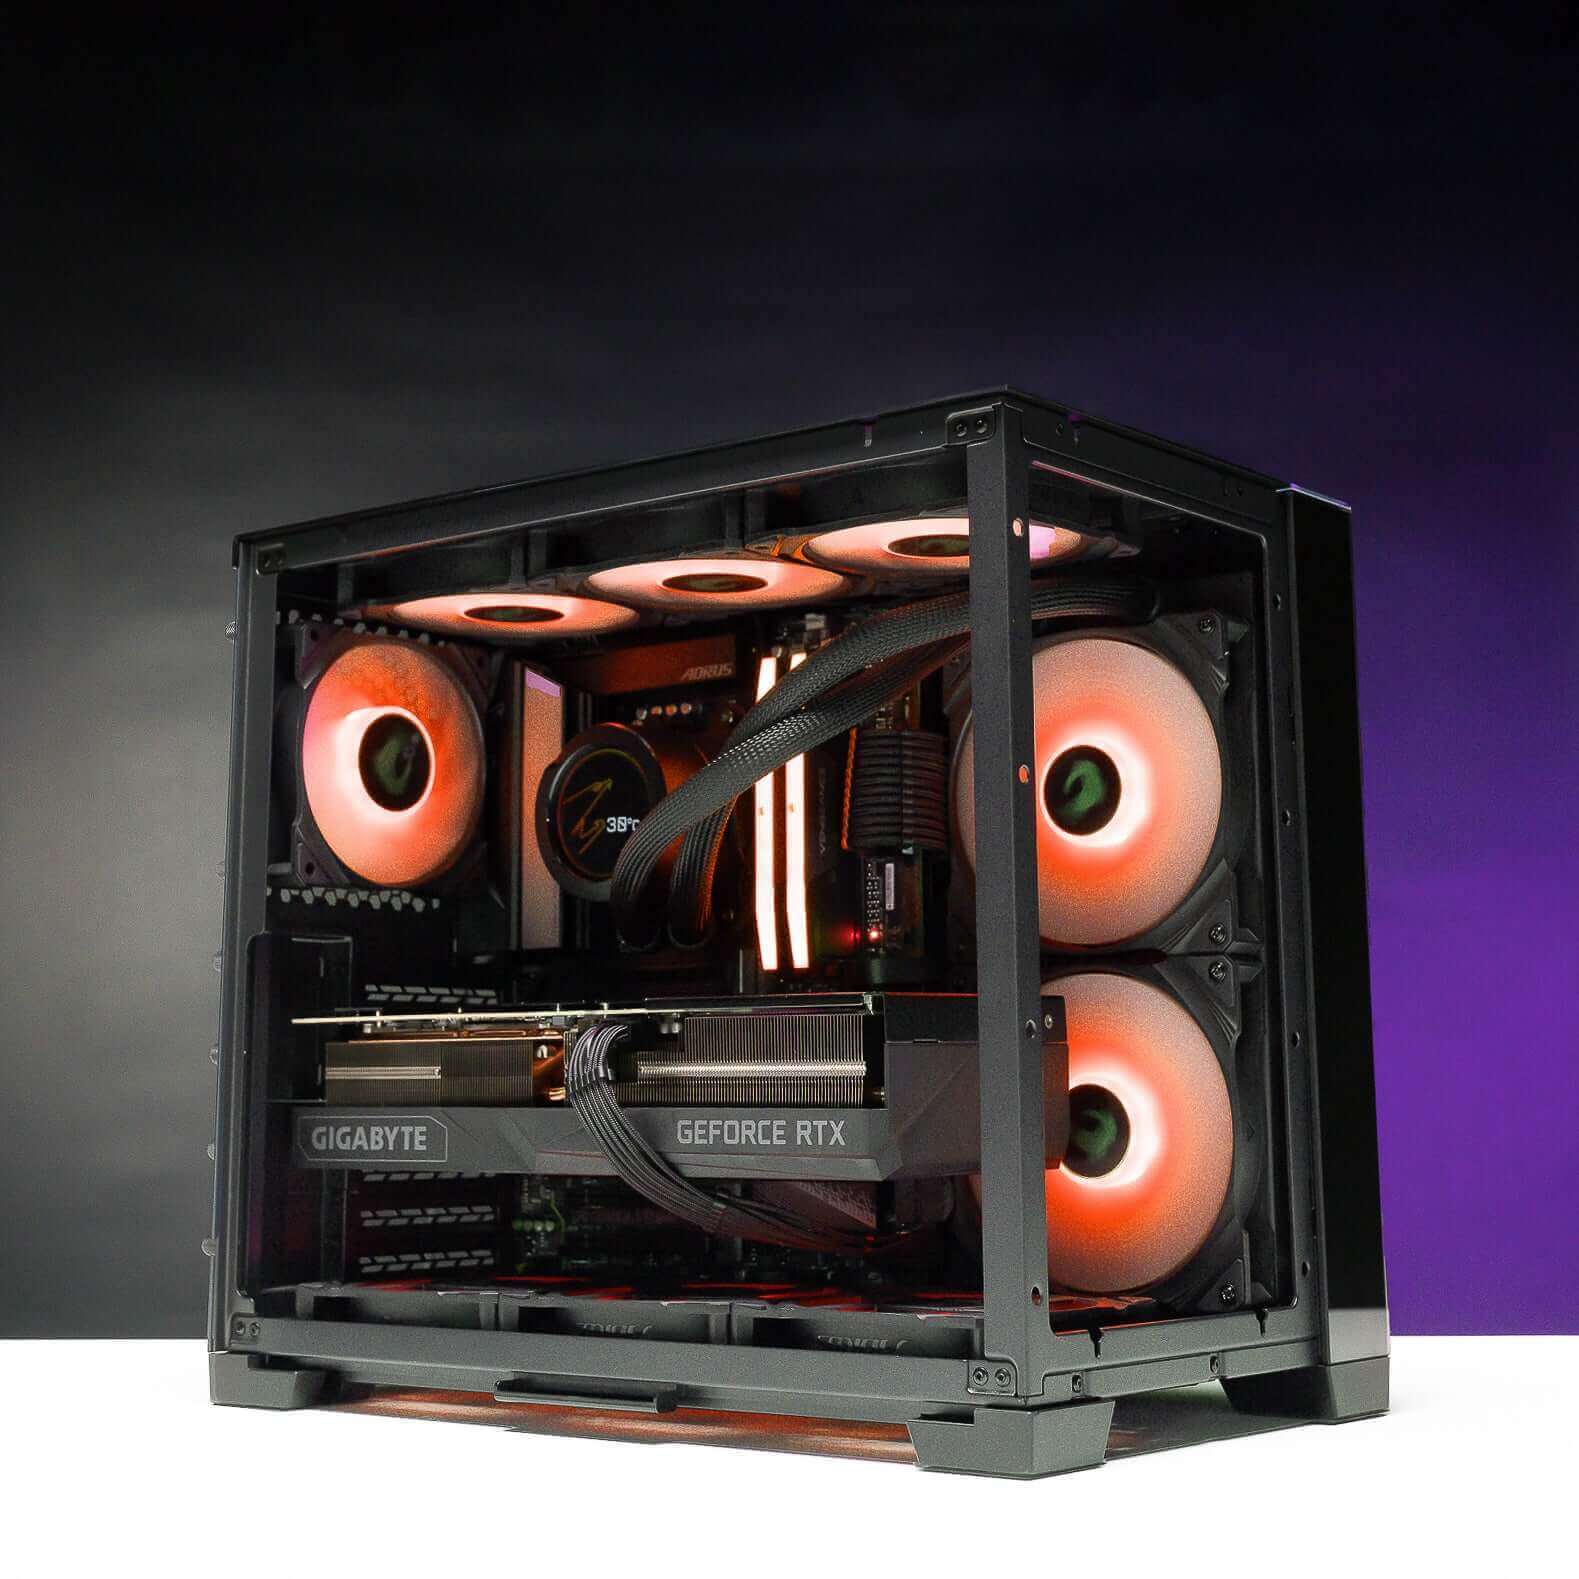 Side view of the powerful EXODIA: LVL X - TAX BACK SALE Gaming PC showcasing the Cooler Master MasterLiquid ML240L RGB V2 Liquid cooler, FSP Dagger Pro 750W 80+ Gold SFX power supply, and Cooler Master SickleFlow 120 ARGB X 9 fans